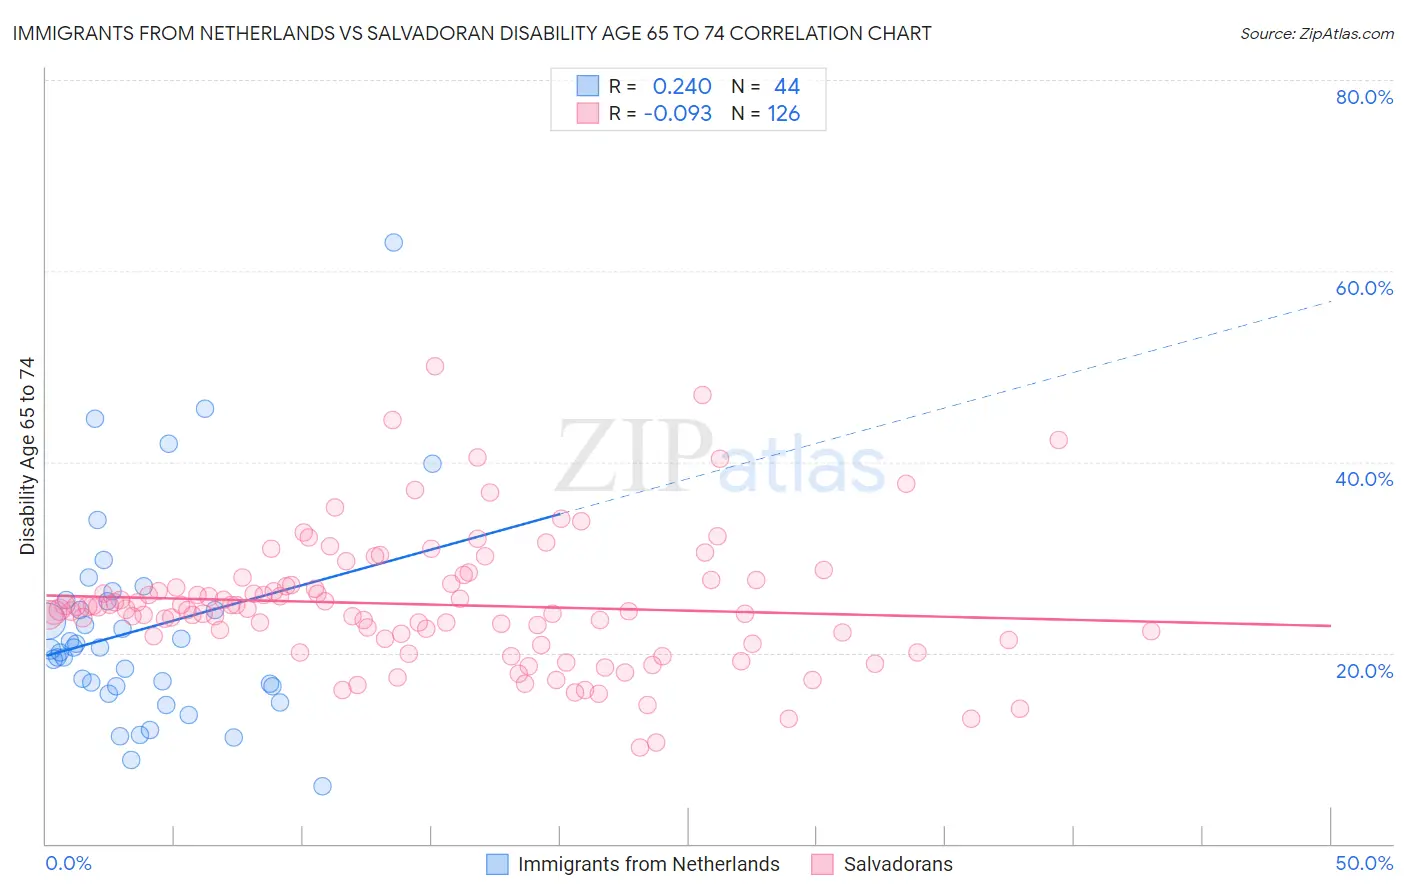 Immigrants from Netherlands vs Salvadoran Disability Age 65 to 74